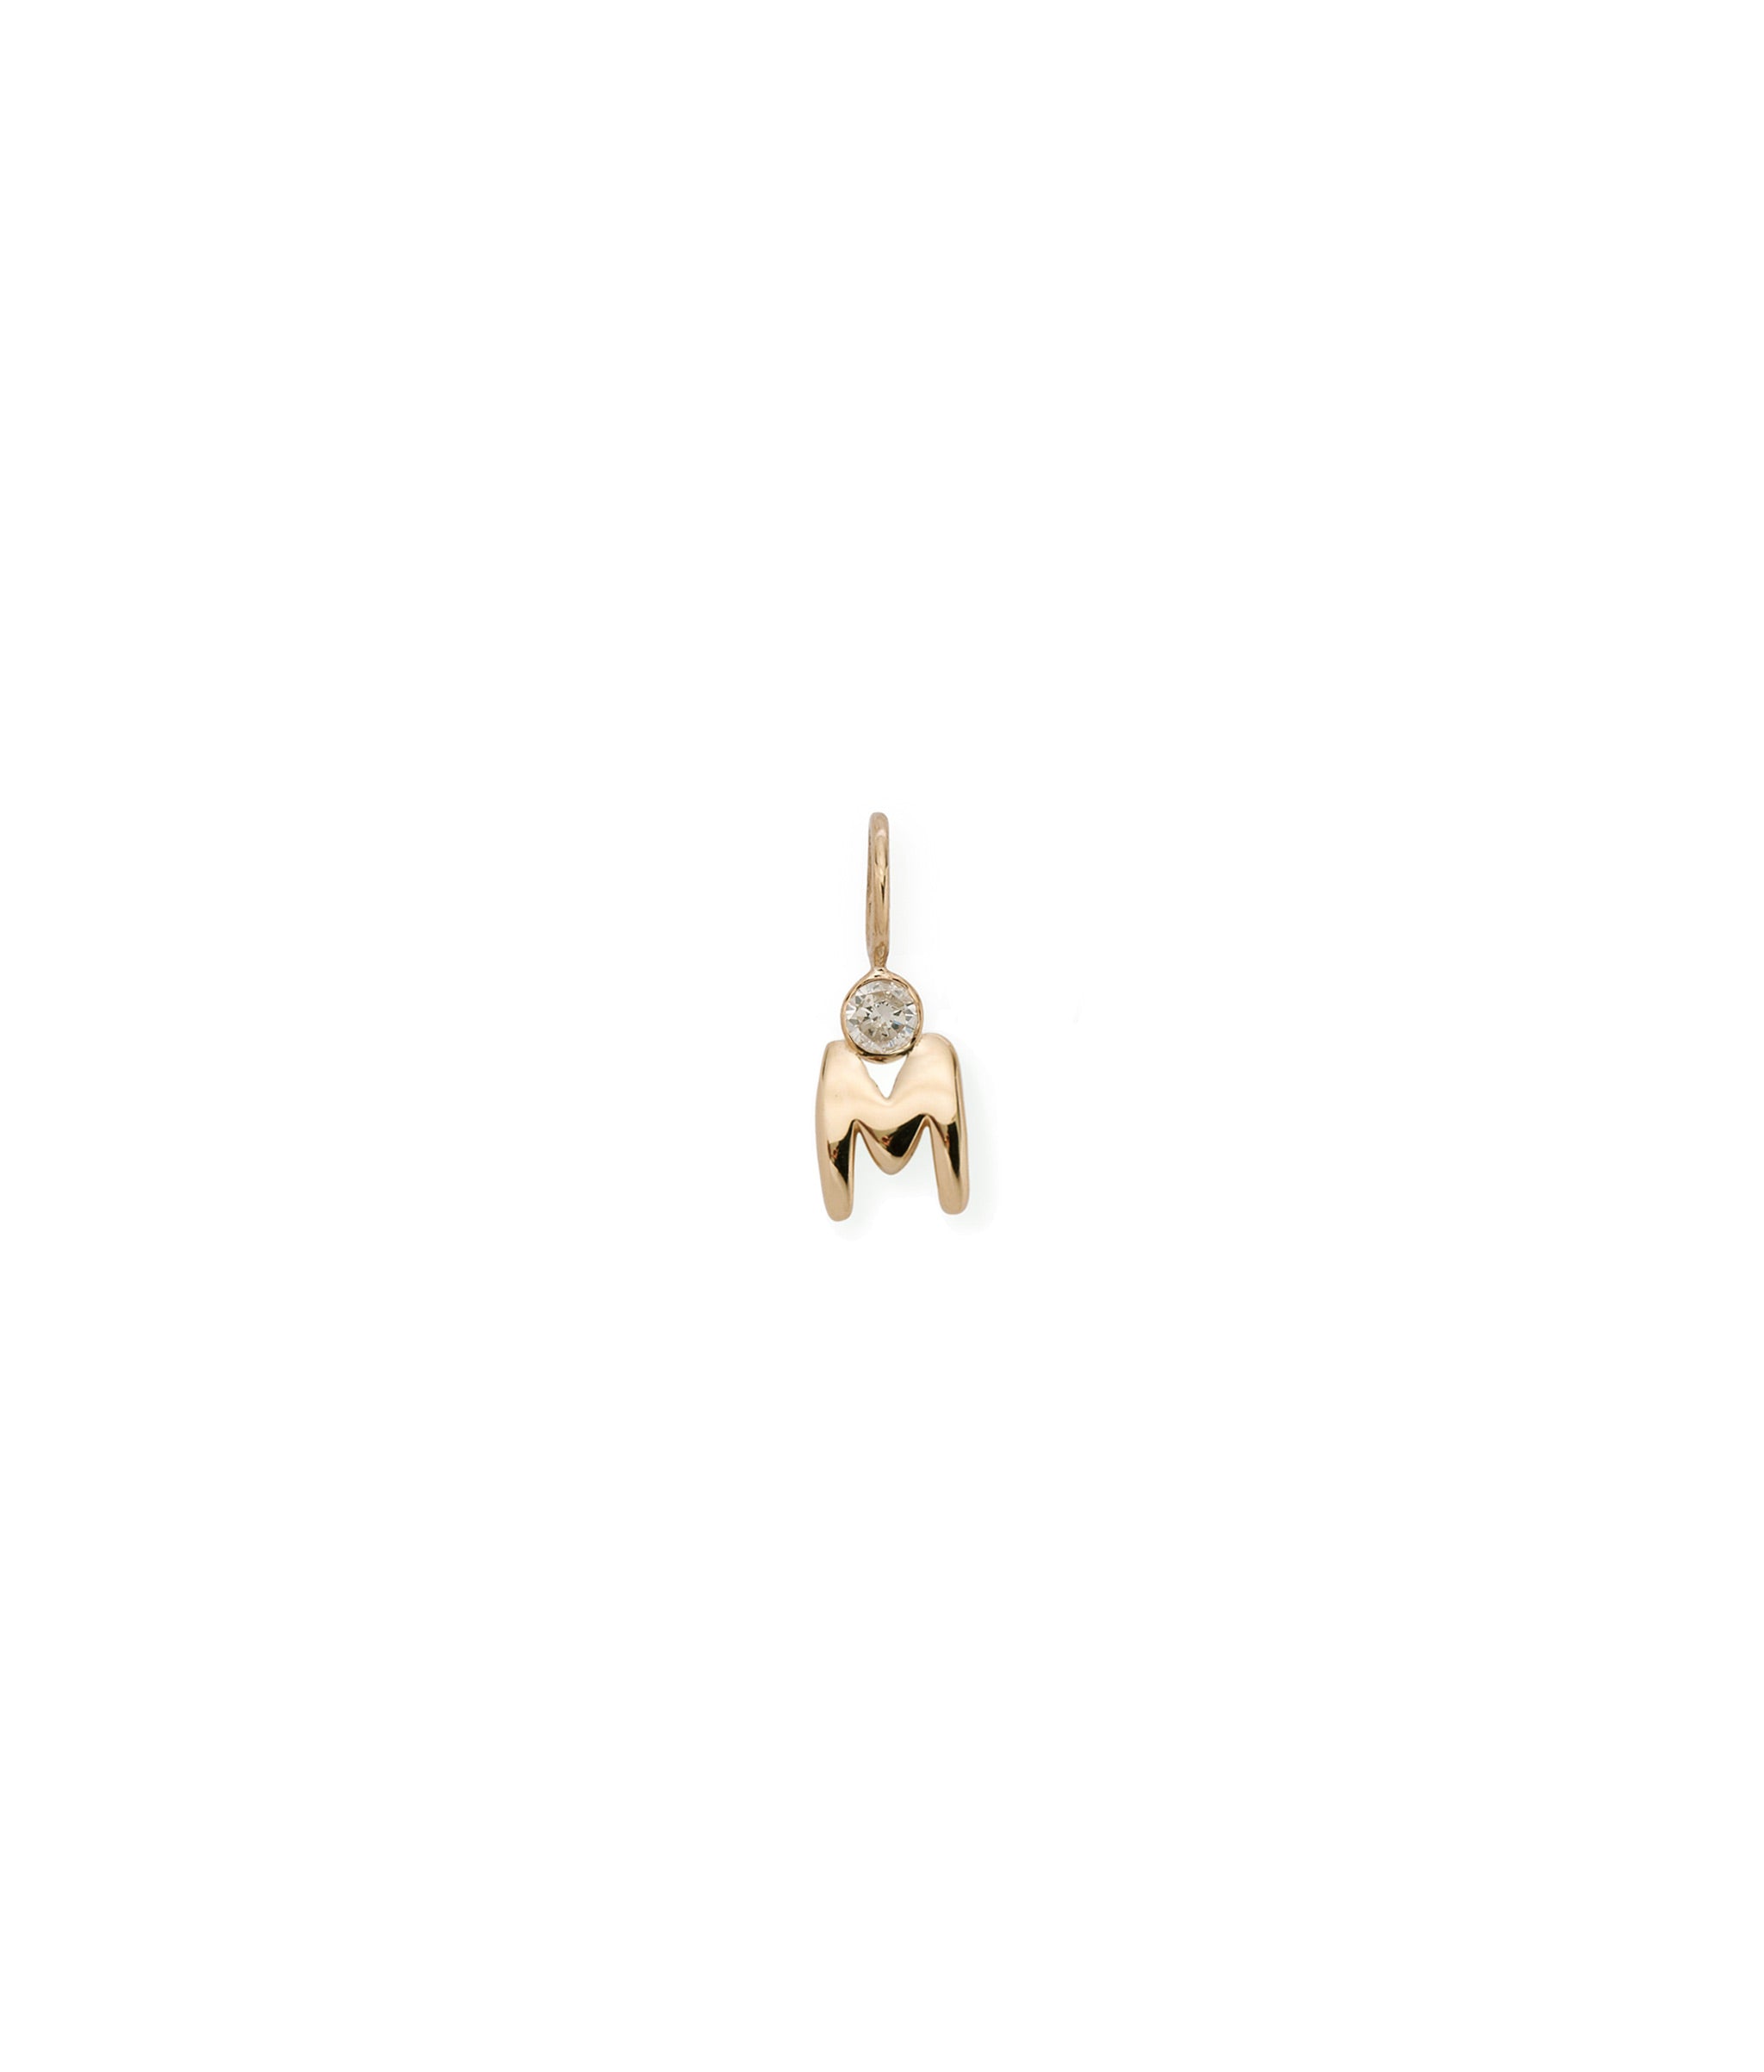 Alphabet Soup "M" Charm. Puffy mini 14k gold letter "M" charm with round diamond accent.